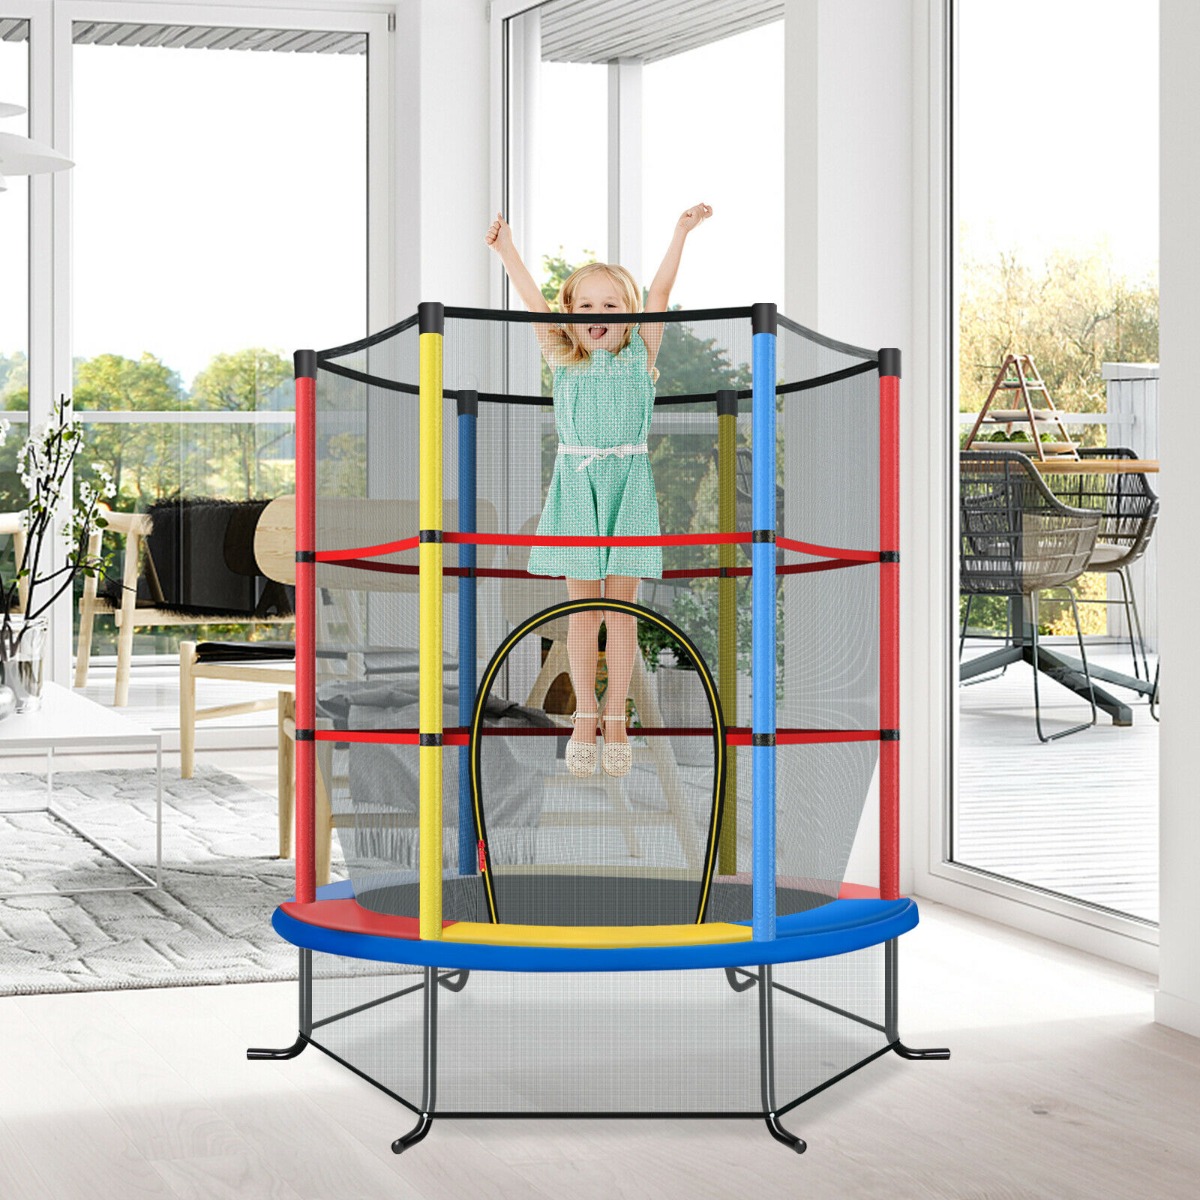 Costway Mini Kids Trampoline with Enclosure Net for Family Games